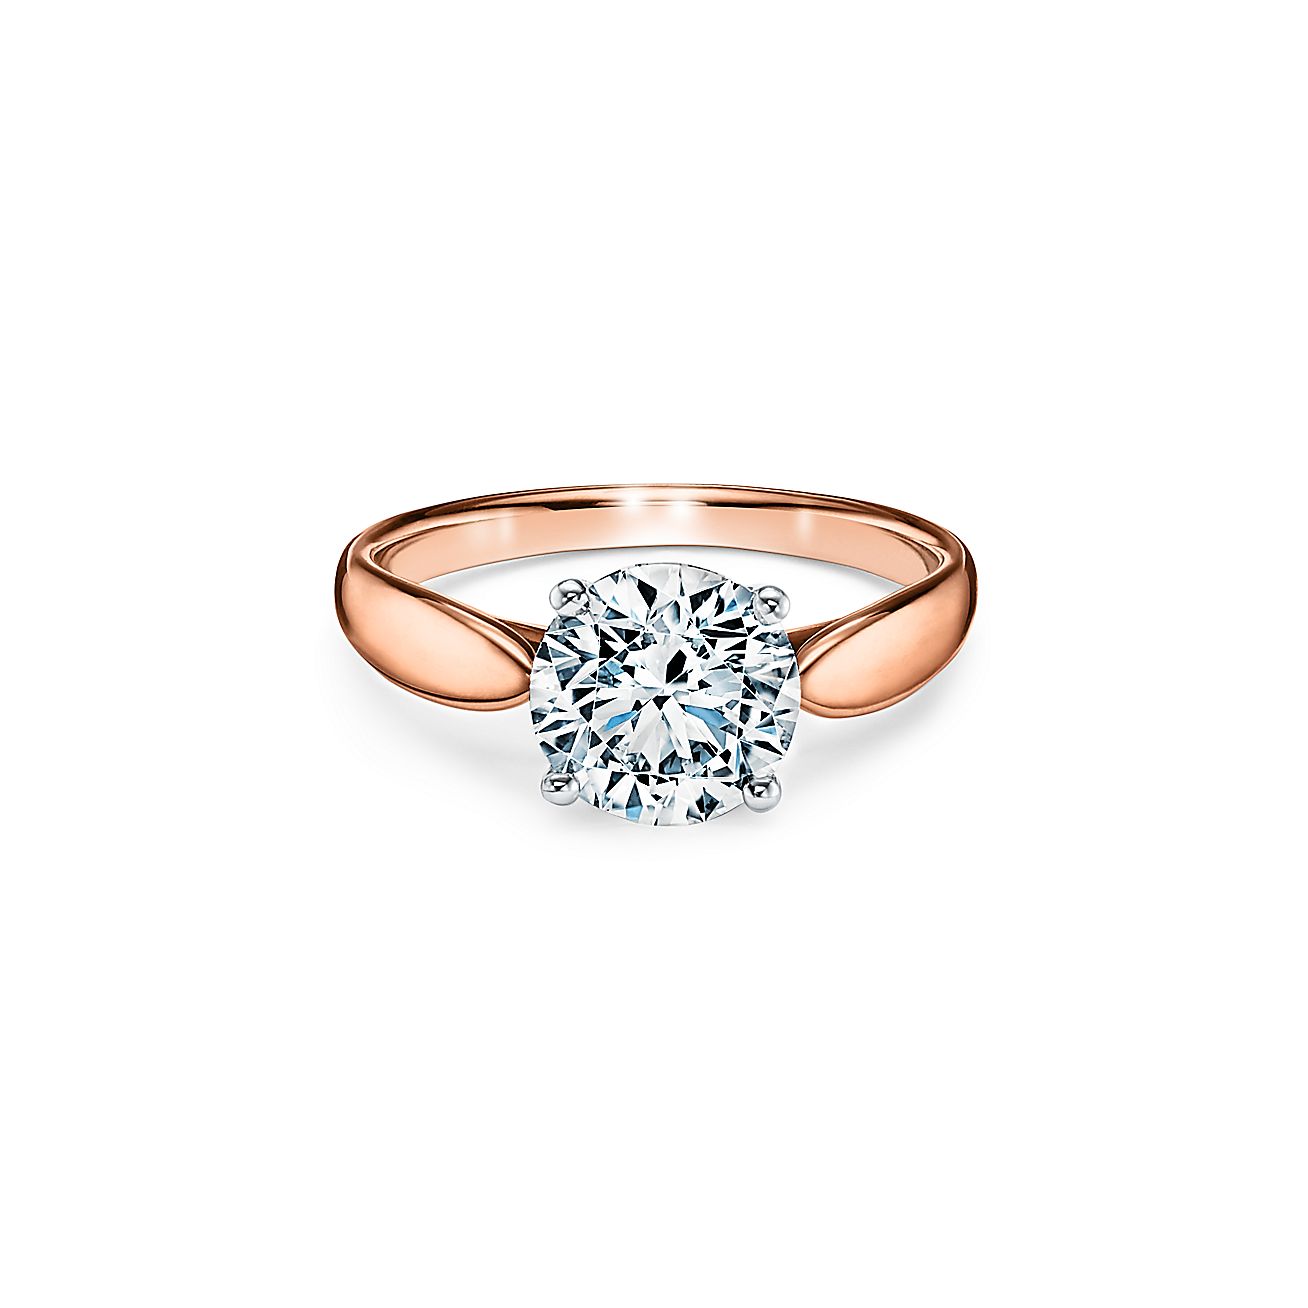 Tiffany Harmony Round Brilliant Engagement Ring In 18k Rose Gold Diamond ring wear it on your hand br it s gonna tell the world i m your only man br diamond diamond ring, wear it on your hand it's gonna tell the world, i'm your only man diamond ring. round brilliant engagement ring in 18k